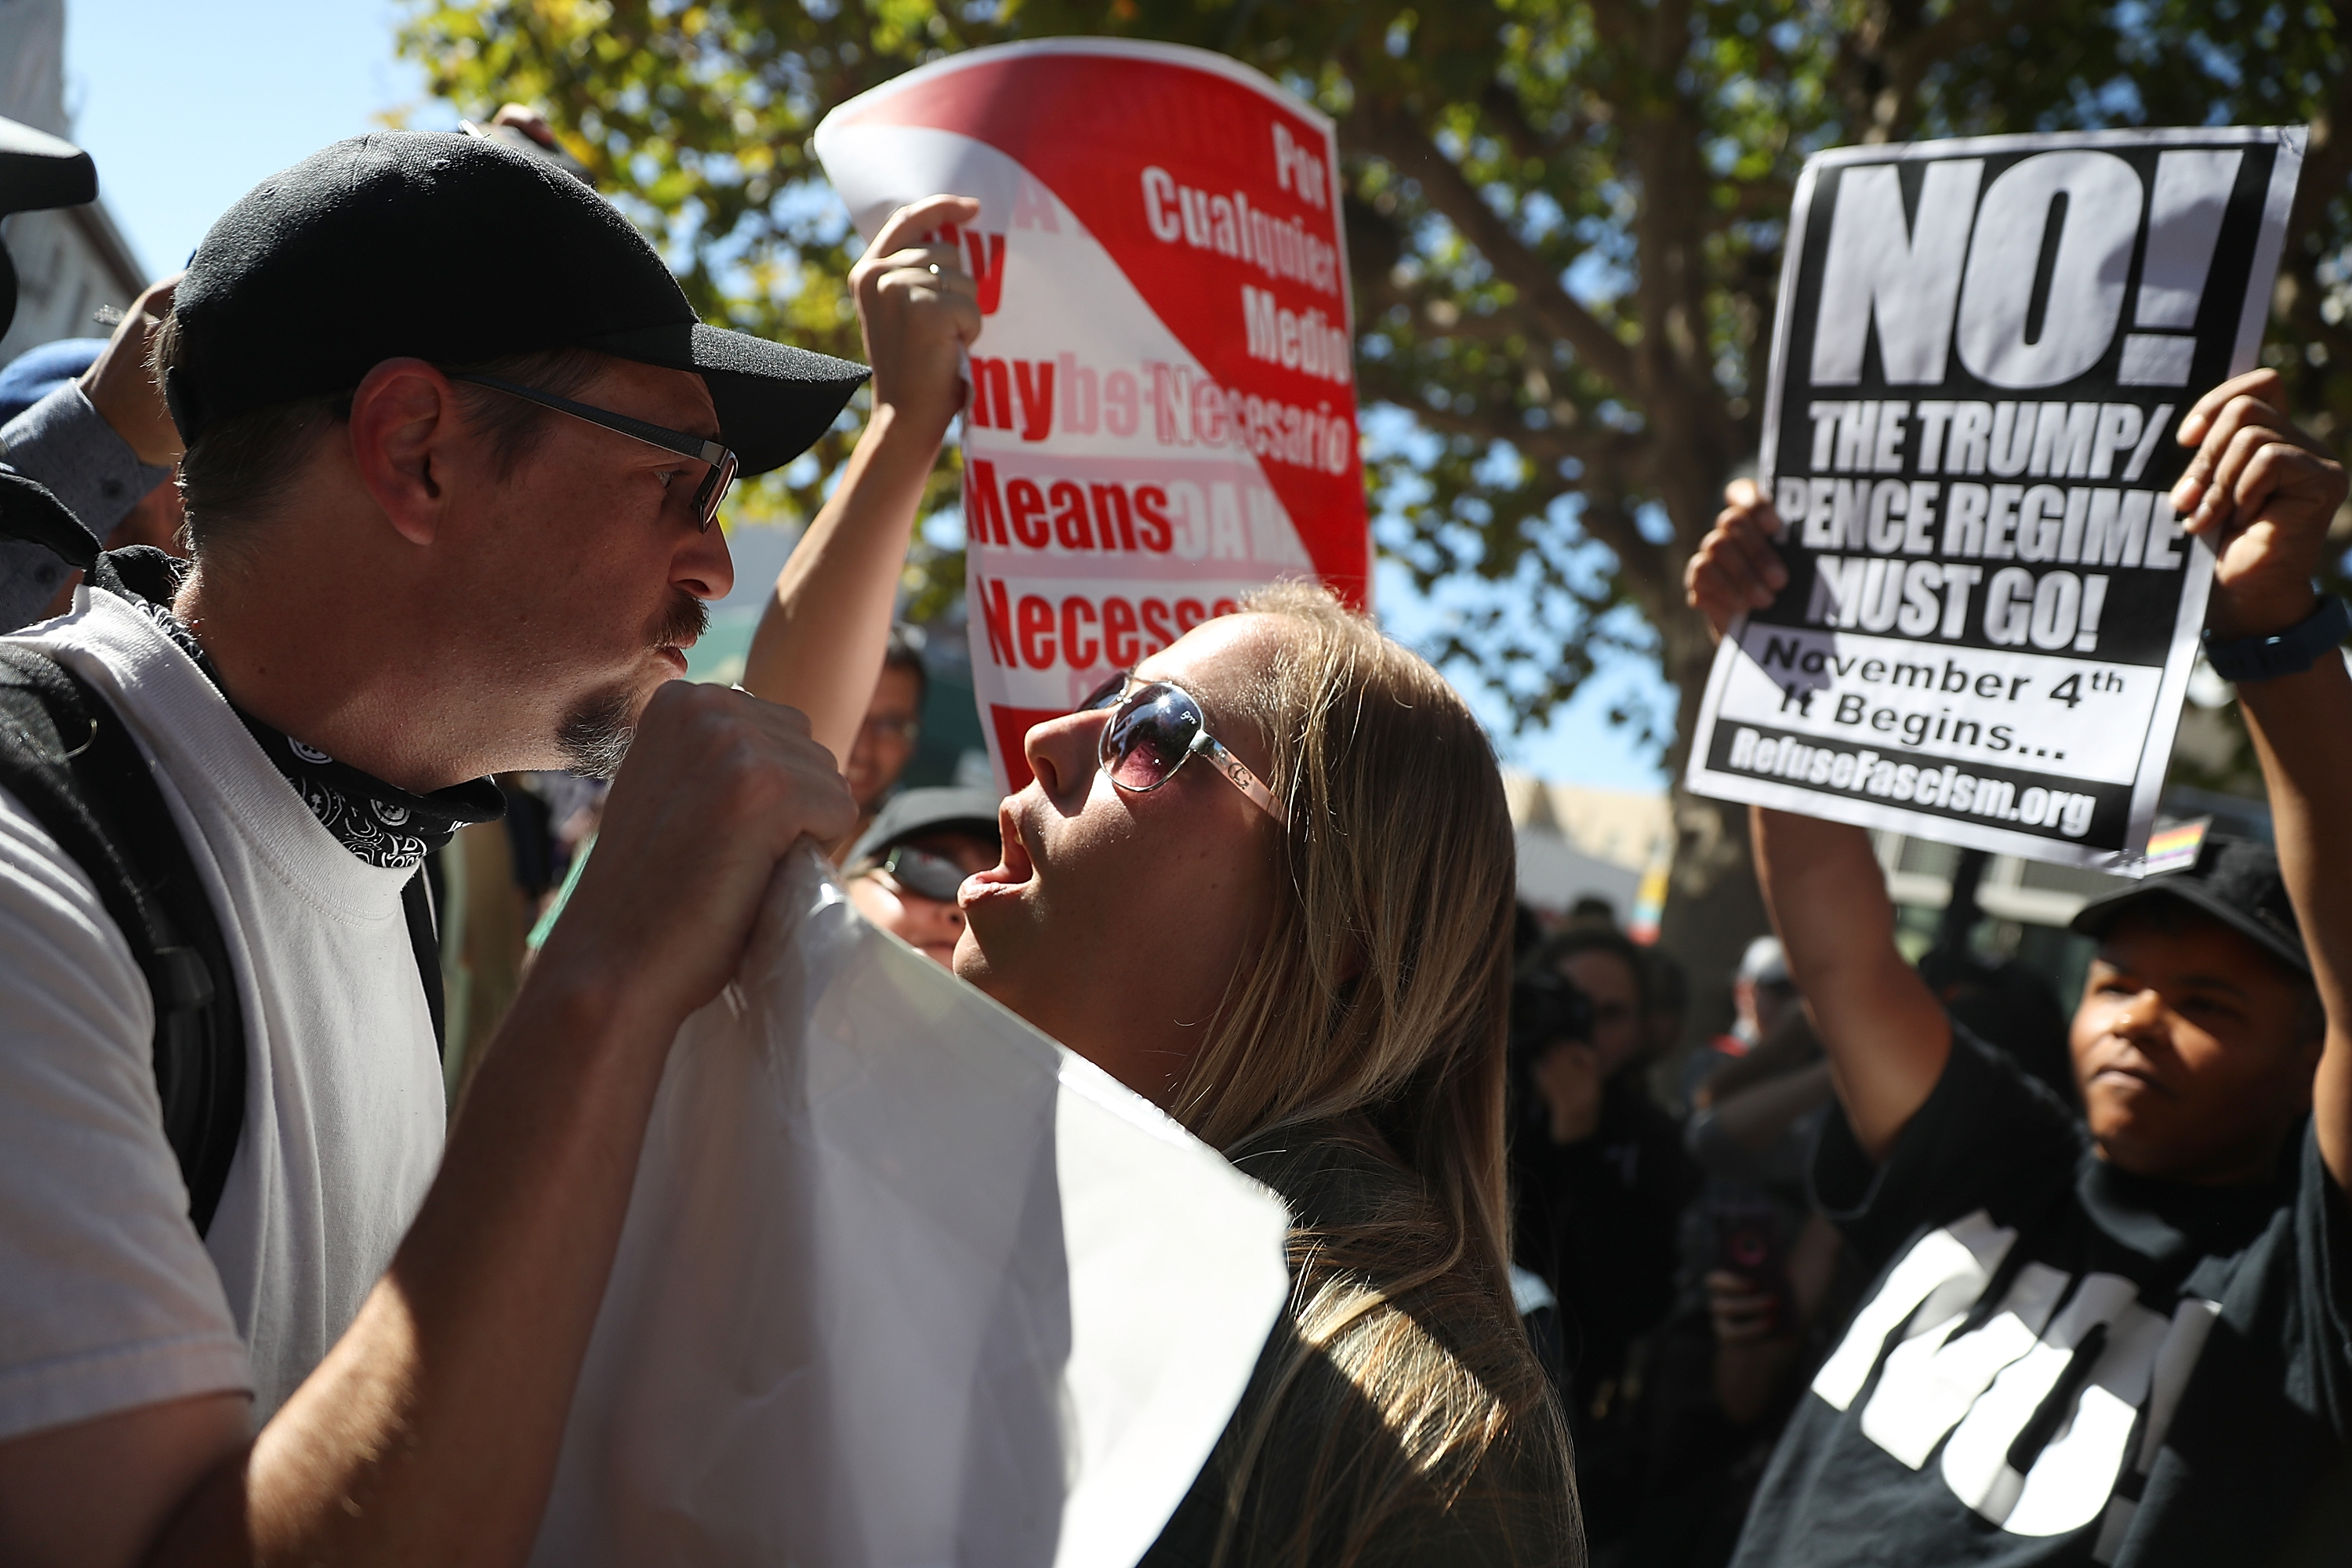 BERKELEY, CA - SEPTEMBER 24:  Protesters shout at each other during a free speech rally with right wing commentator Milo Yiannopoulos at U.C. Berkeley on September 24, 2017 in Berkeley, California. Hundreds of protesters came out to support and demonstrate against Milo Yiannopoulos as he held a free speech rally at U.C. Berkeley.  (Photo by Justin Sullivan/Getty Images) (Justin Sullivan—Getty Images)